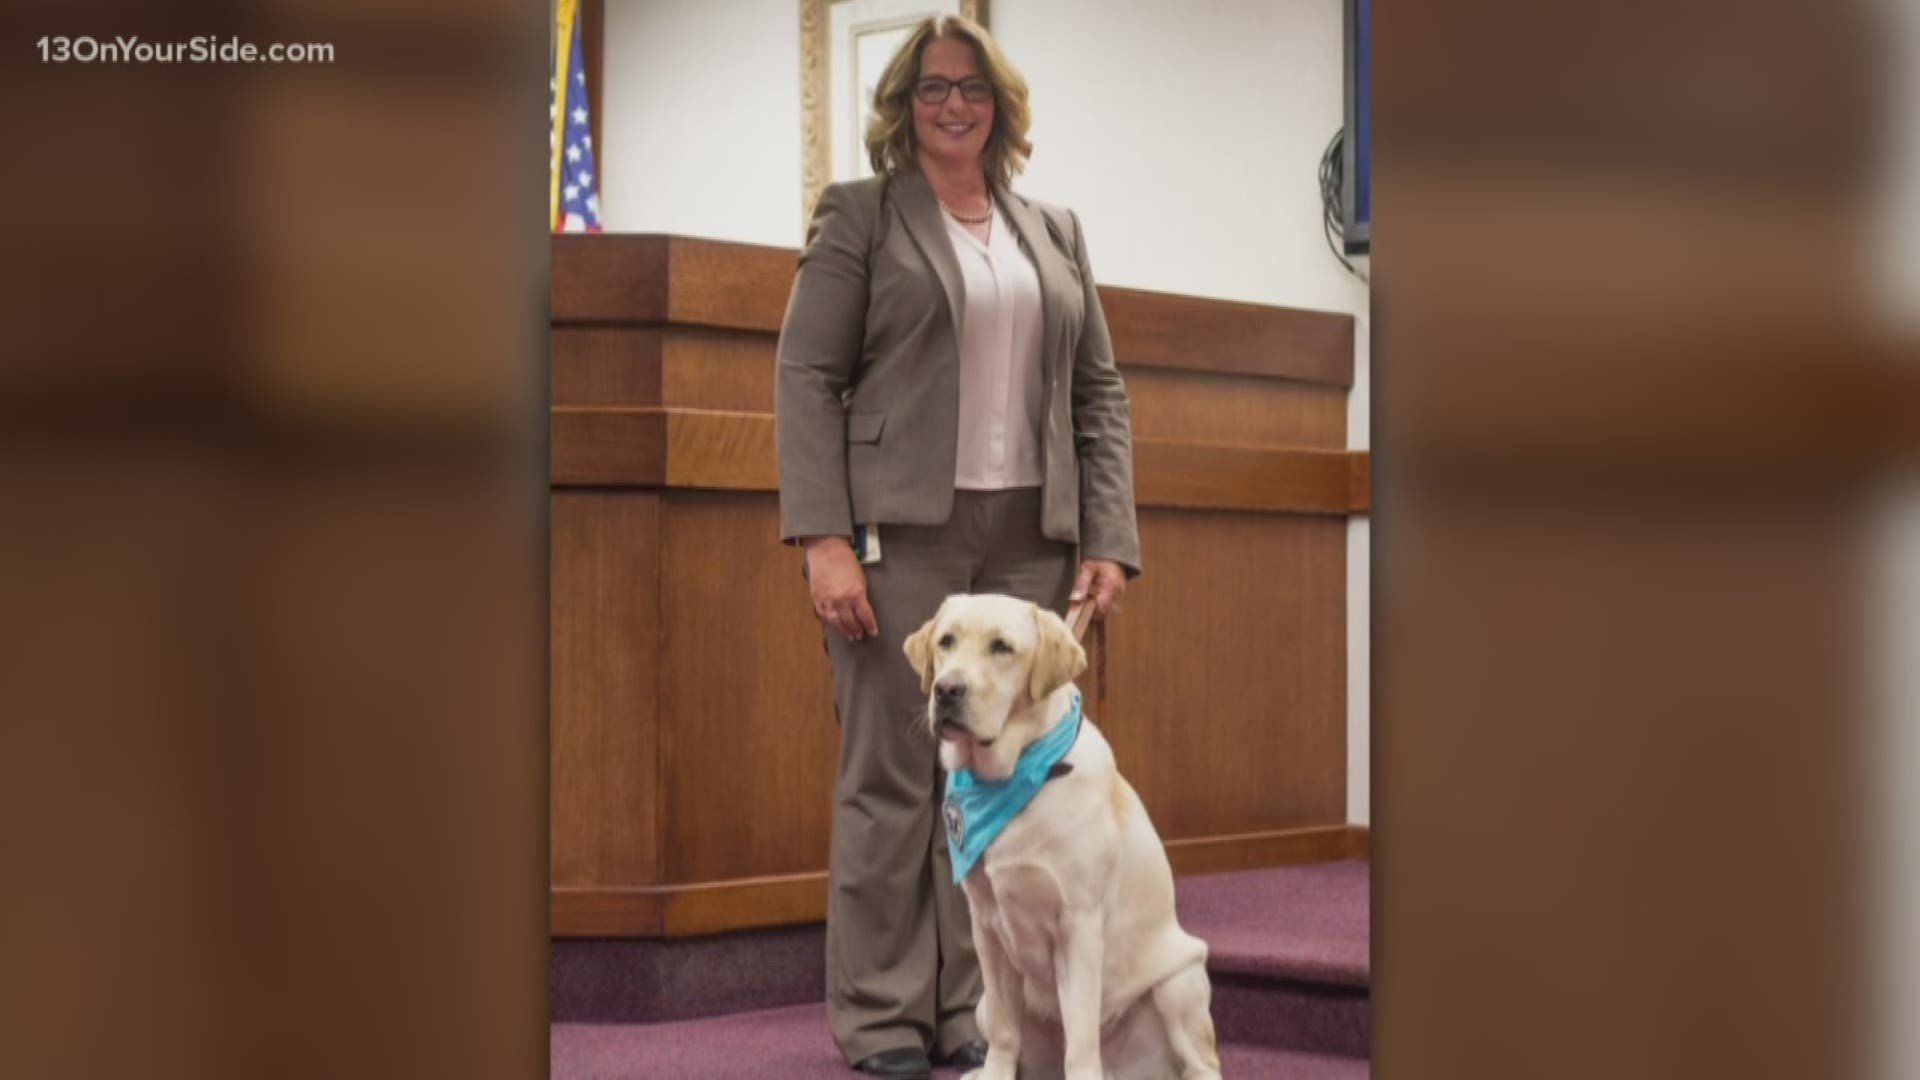 The 20-month-old Labrador Retriever will provide a valuable and much-needed service to child victims in Allegan County, said Prosecuting Attorney  Myrene K. Koch.